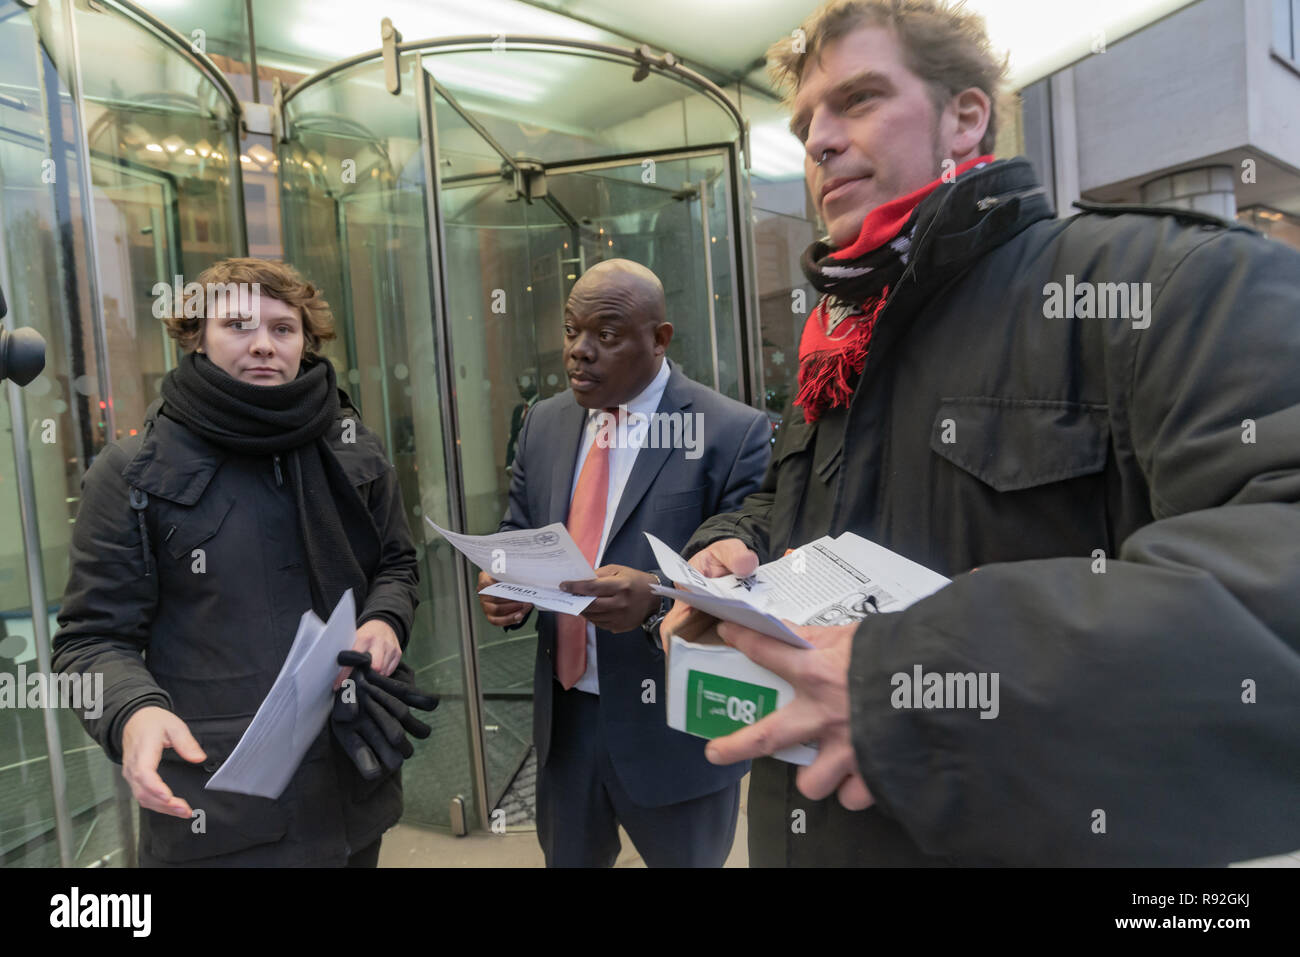 London, UK. 18th December 2018. Berlin community centre and pub Syndikat protesters talk with staff from their landlord, Global Real Estate Investors Limited, owned by the secretive Pears brothers, three of the richest men in the UK, who through various 'letterbox' companies own around 6200 properties in Berlin, against notice to quit after being open for 33 years in Berlin-Neukölln. Credit: Peter Marshall/Alamy Live News Stock Photo